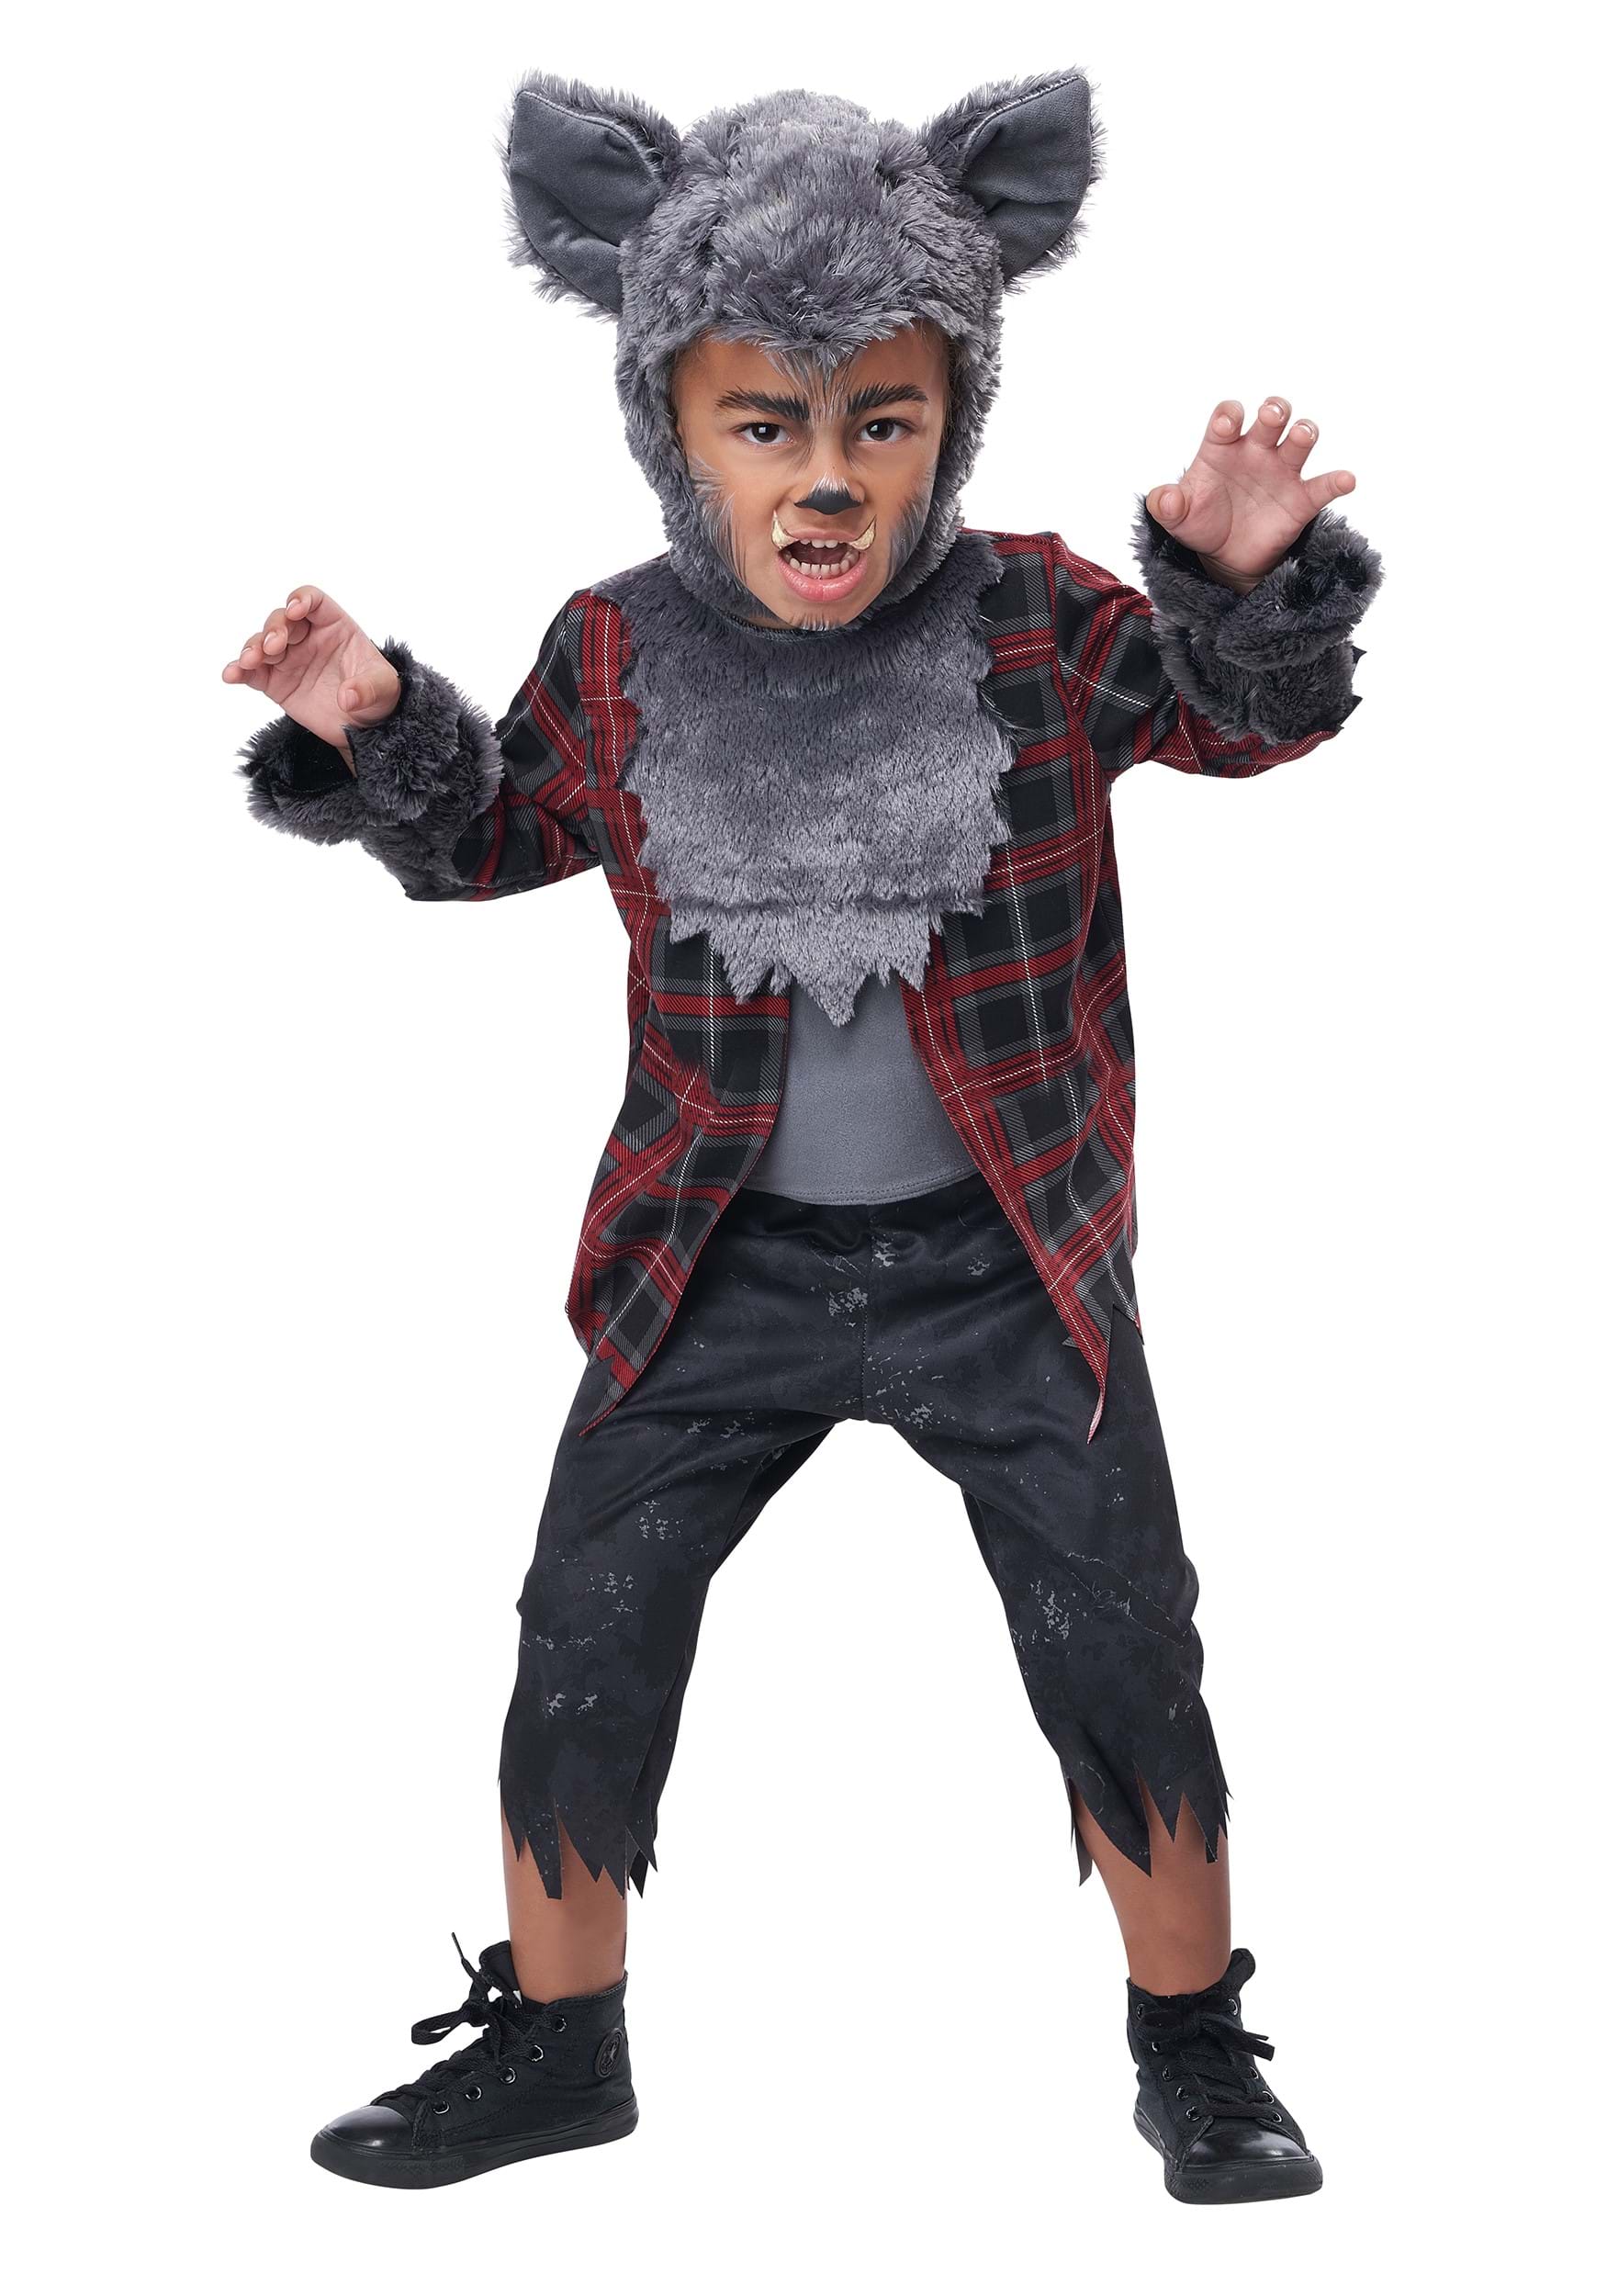 Photos - Fancy Dress California Costume Collection Werewolf Pup Boy's Costume Gray/Red CA21 